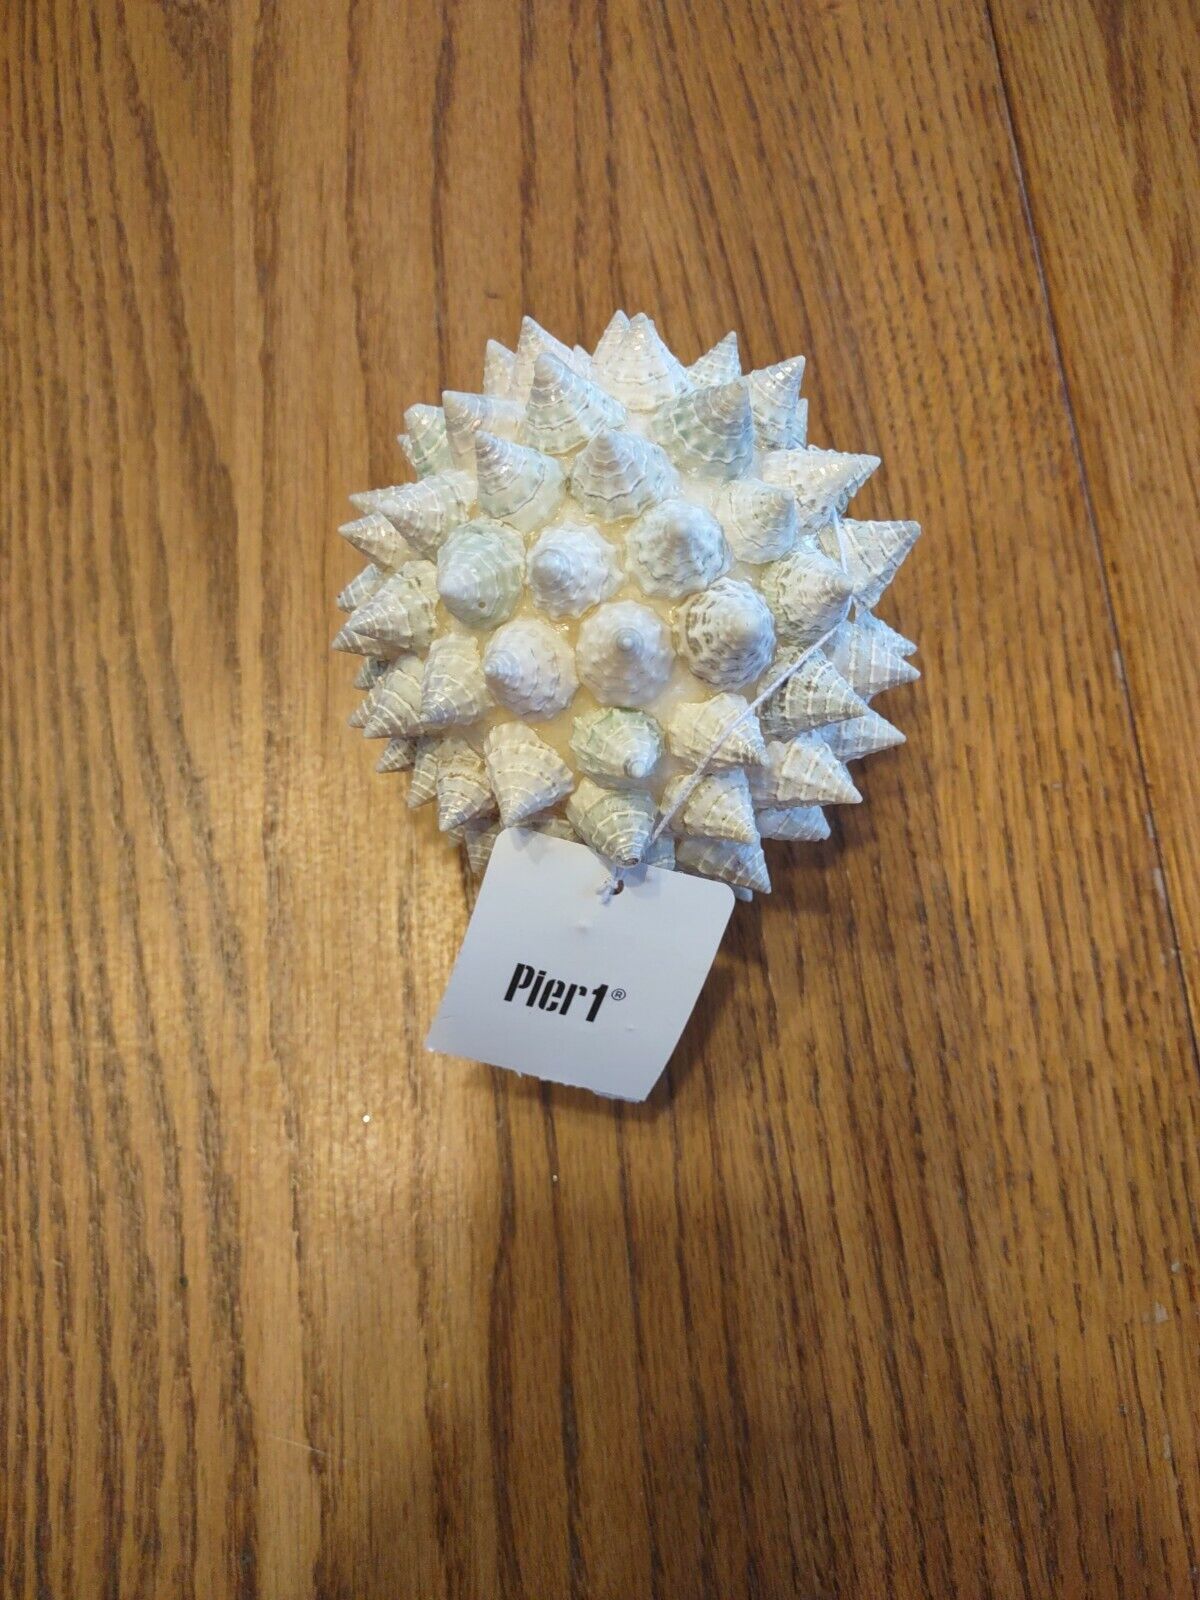 Pier 1 Shell Ball Decorative-Brand New-SHIPS N 24 HOURS - $29.58